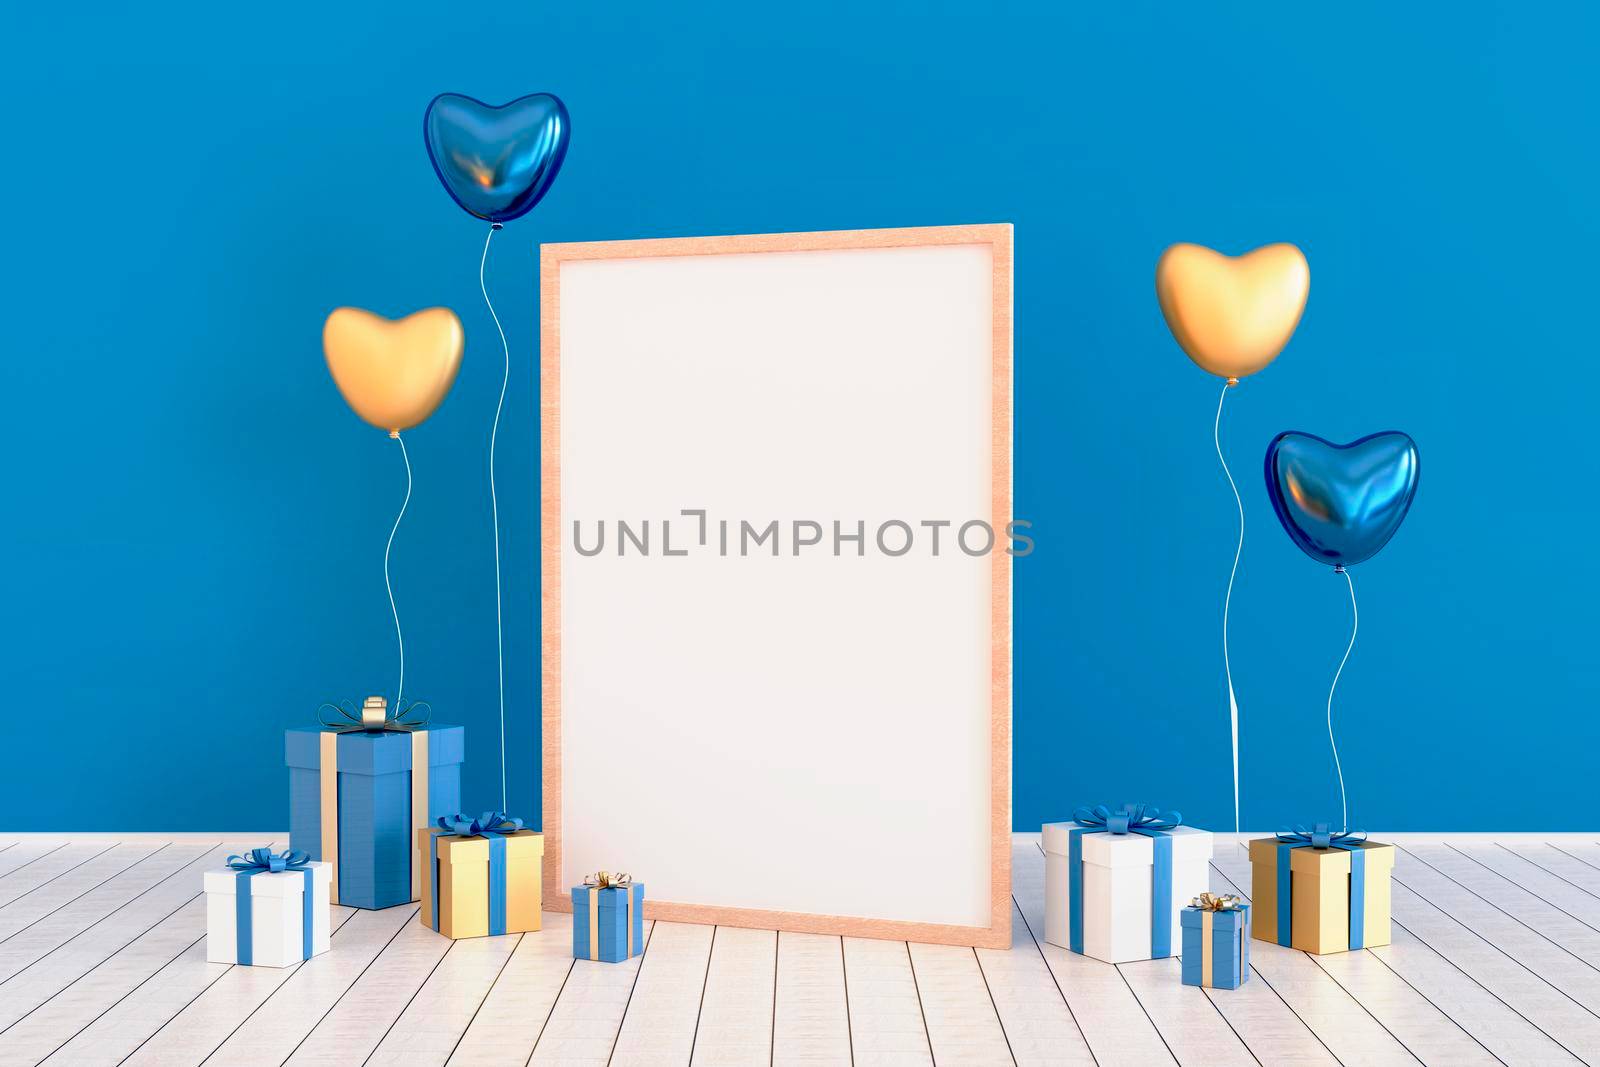 Set of glossy 3d realistic balloons and gift boxes. Valentine's Day or wedding day romantic themes for party, events, social media or promotion banner, posters. 3d illustration